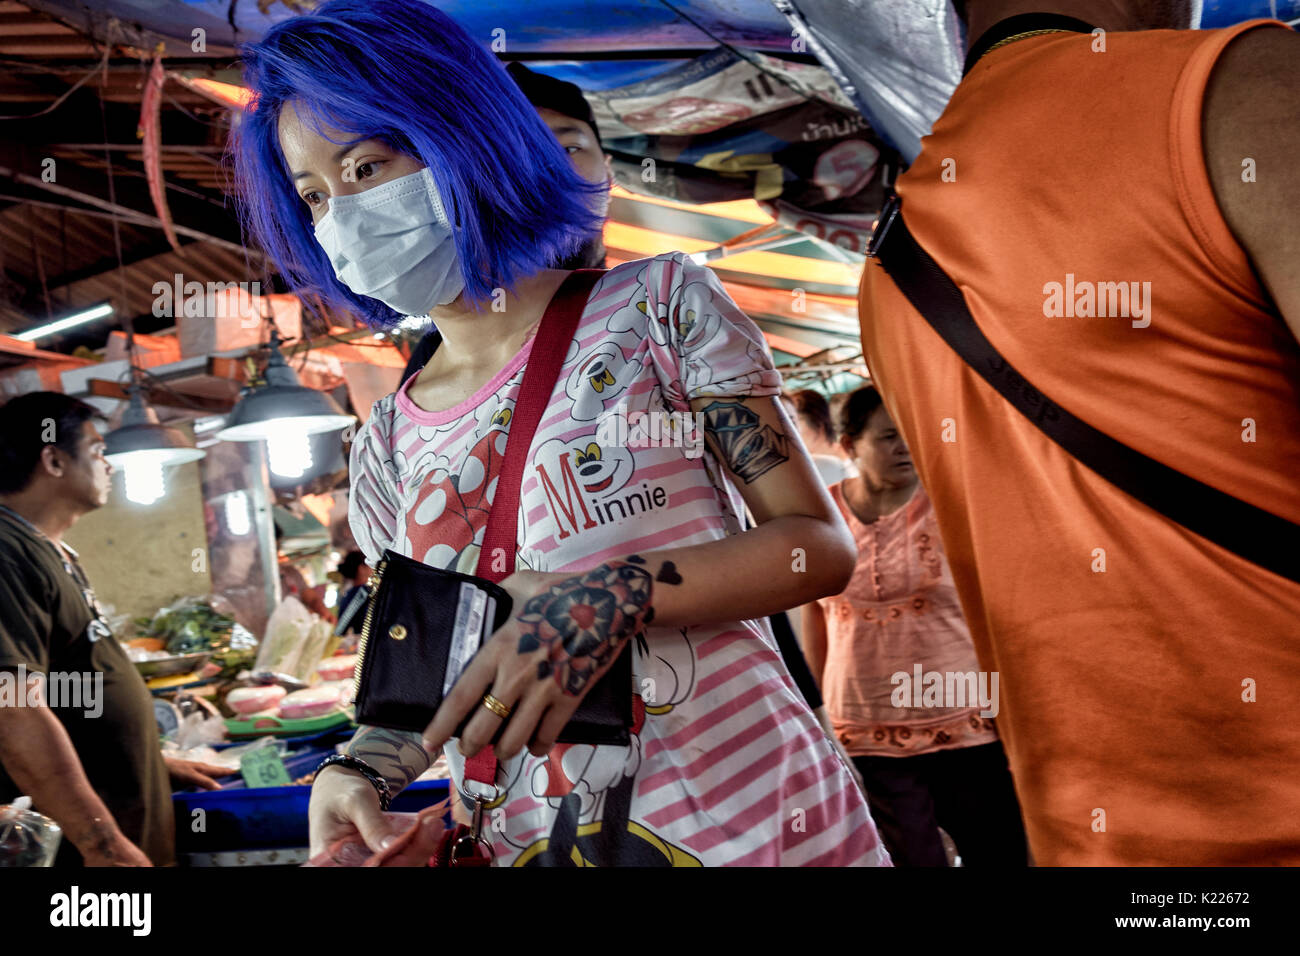 Woman blue hair and tattoos. Fashion Conscious Asian youth. Thailand Southeast Asia. Extreme colored hair Stock Photo